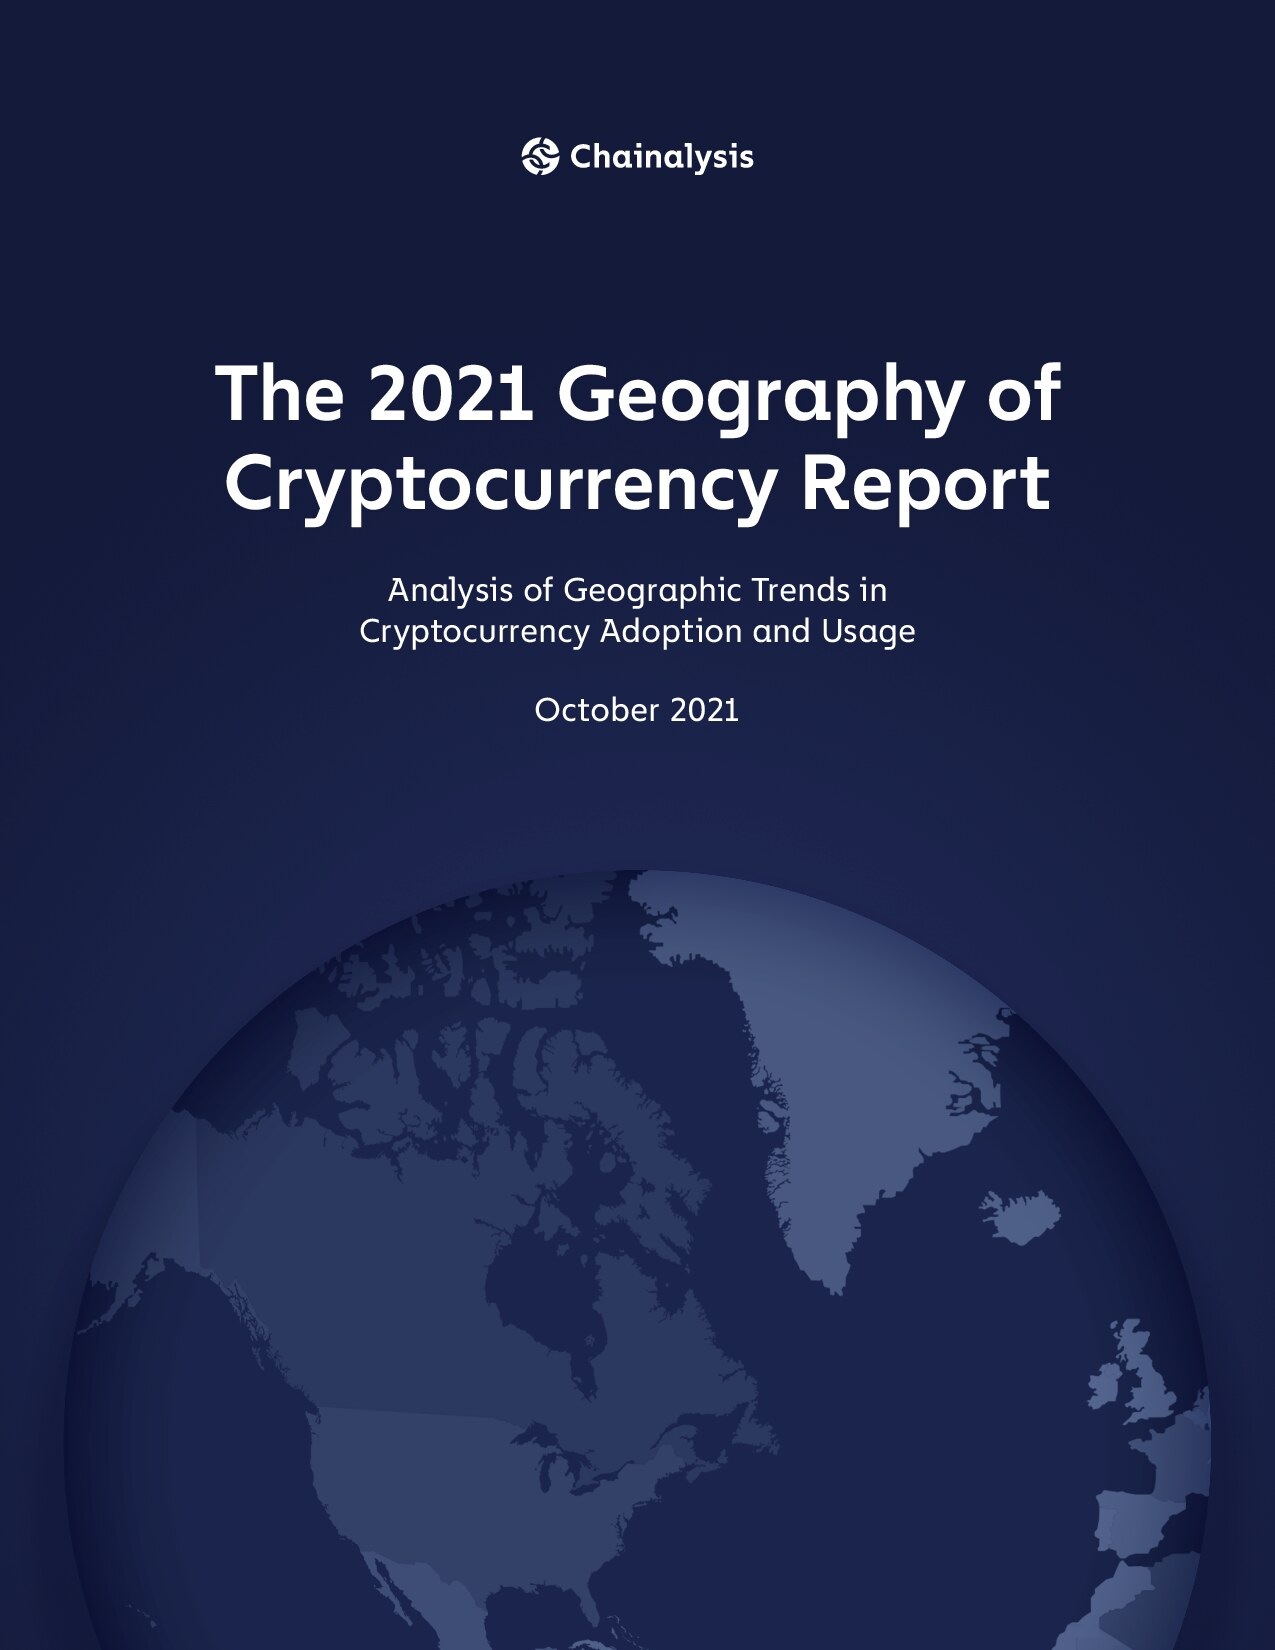 Geography of Cryptocurrency 2021